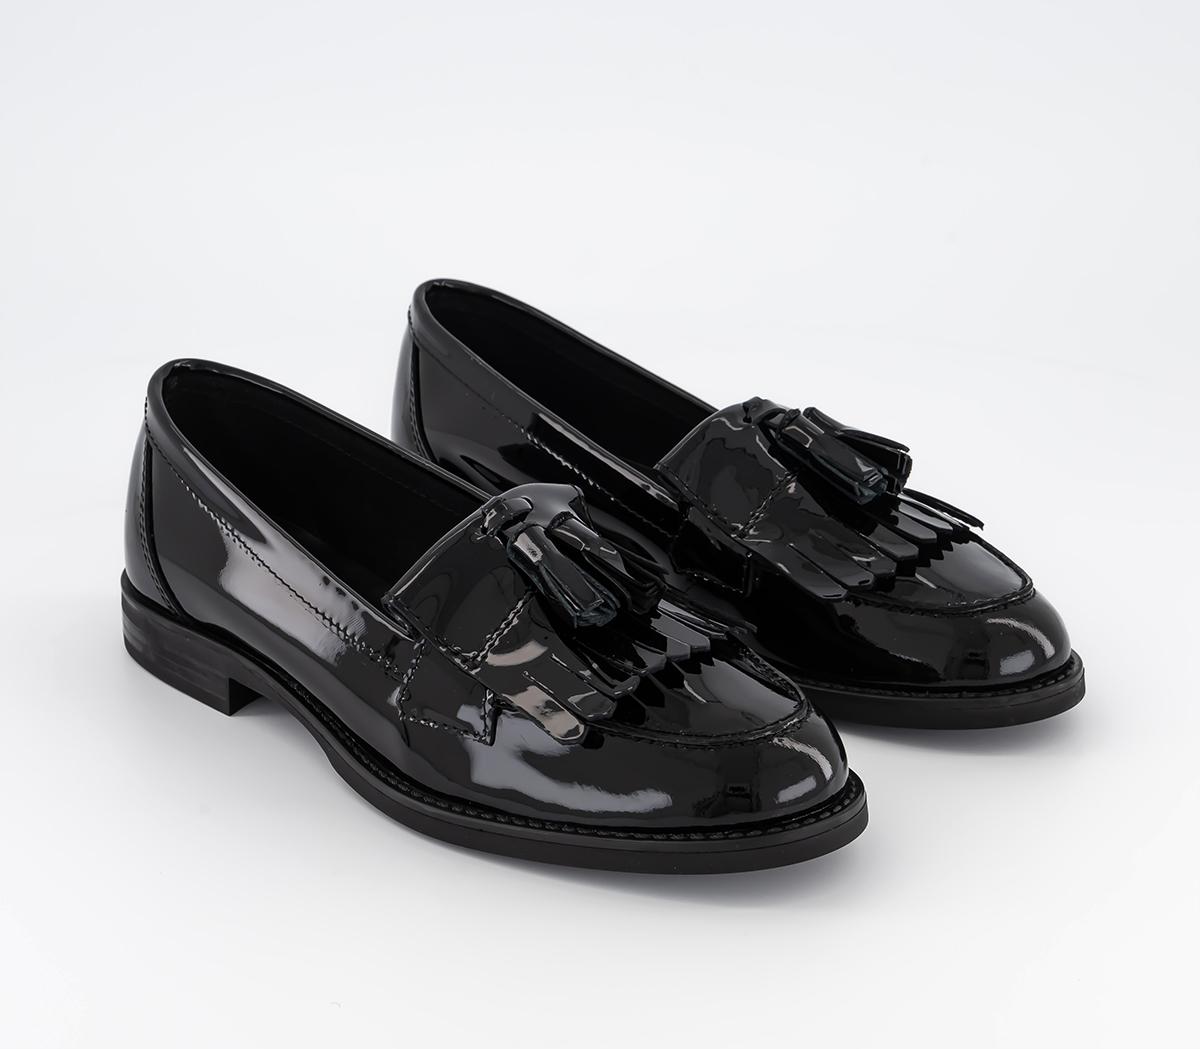 OFFICE Womens Fitz Tassle Fringe Loafers Black Patent Leather, 3